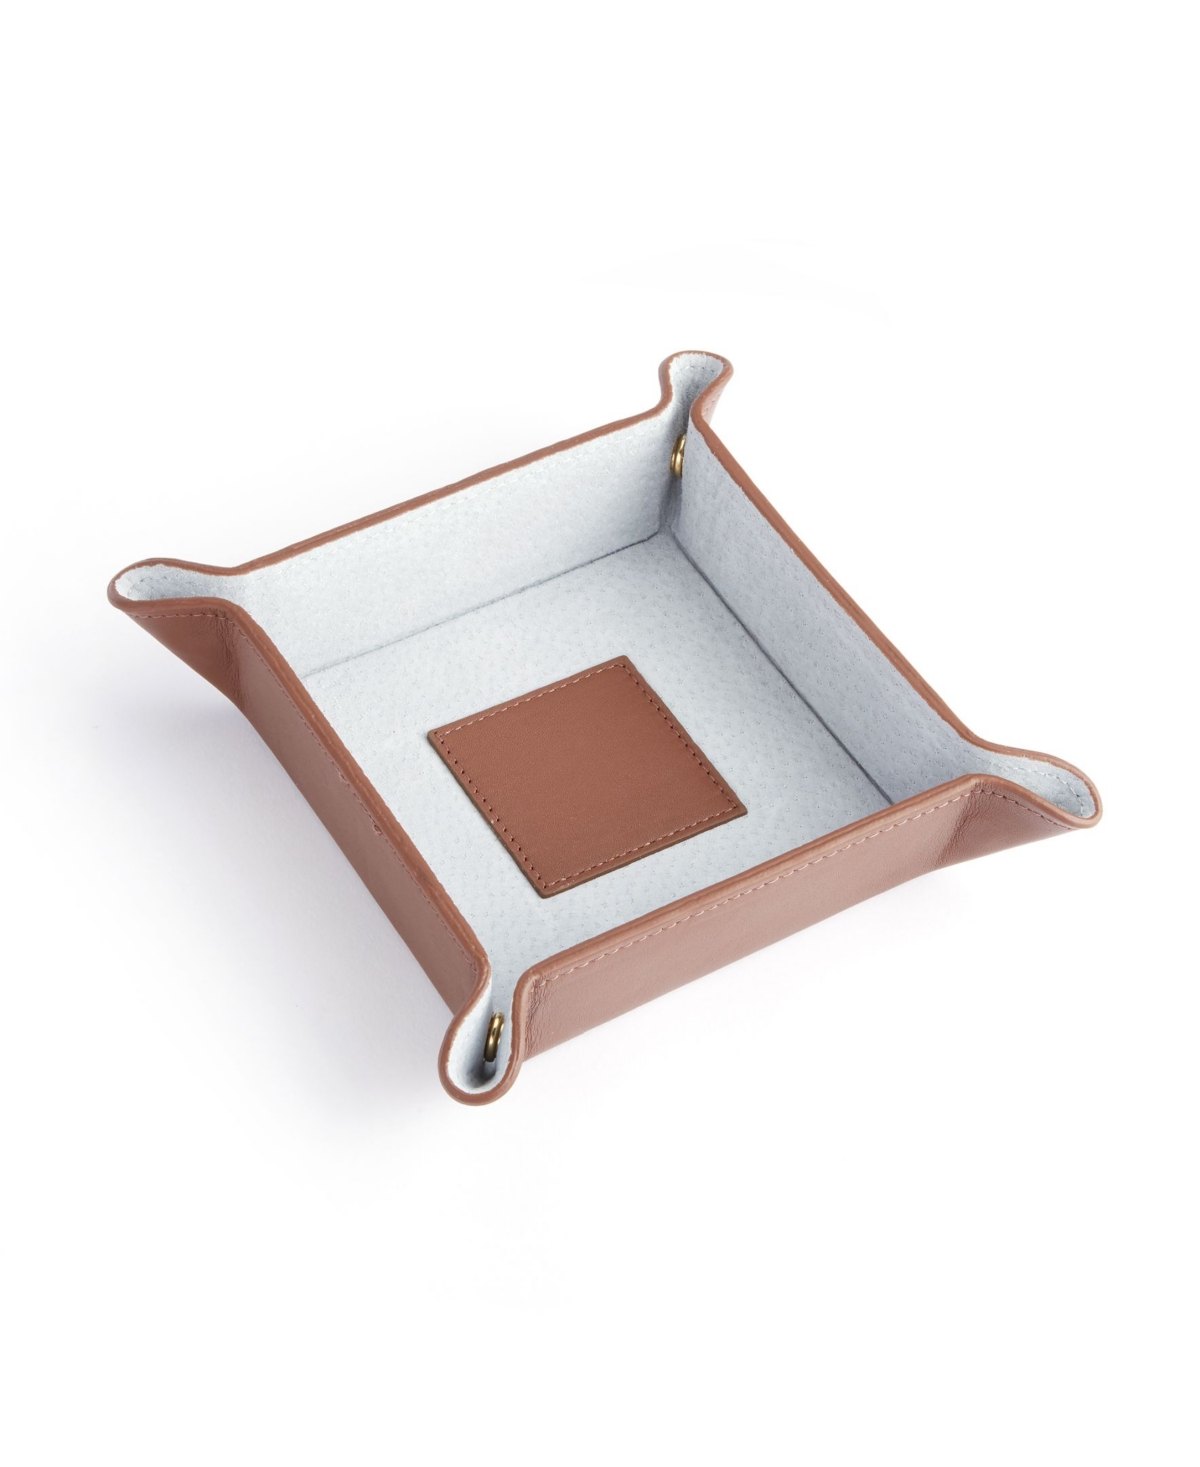 Suede Lined Catchall Valet Tray - Tan